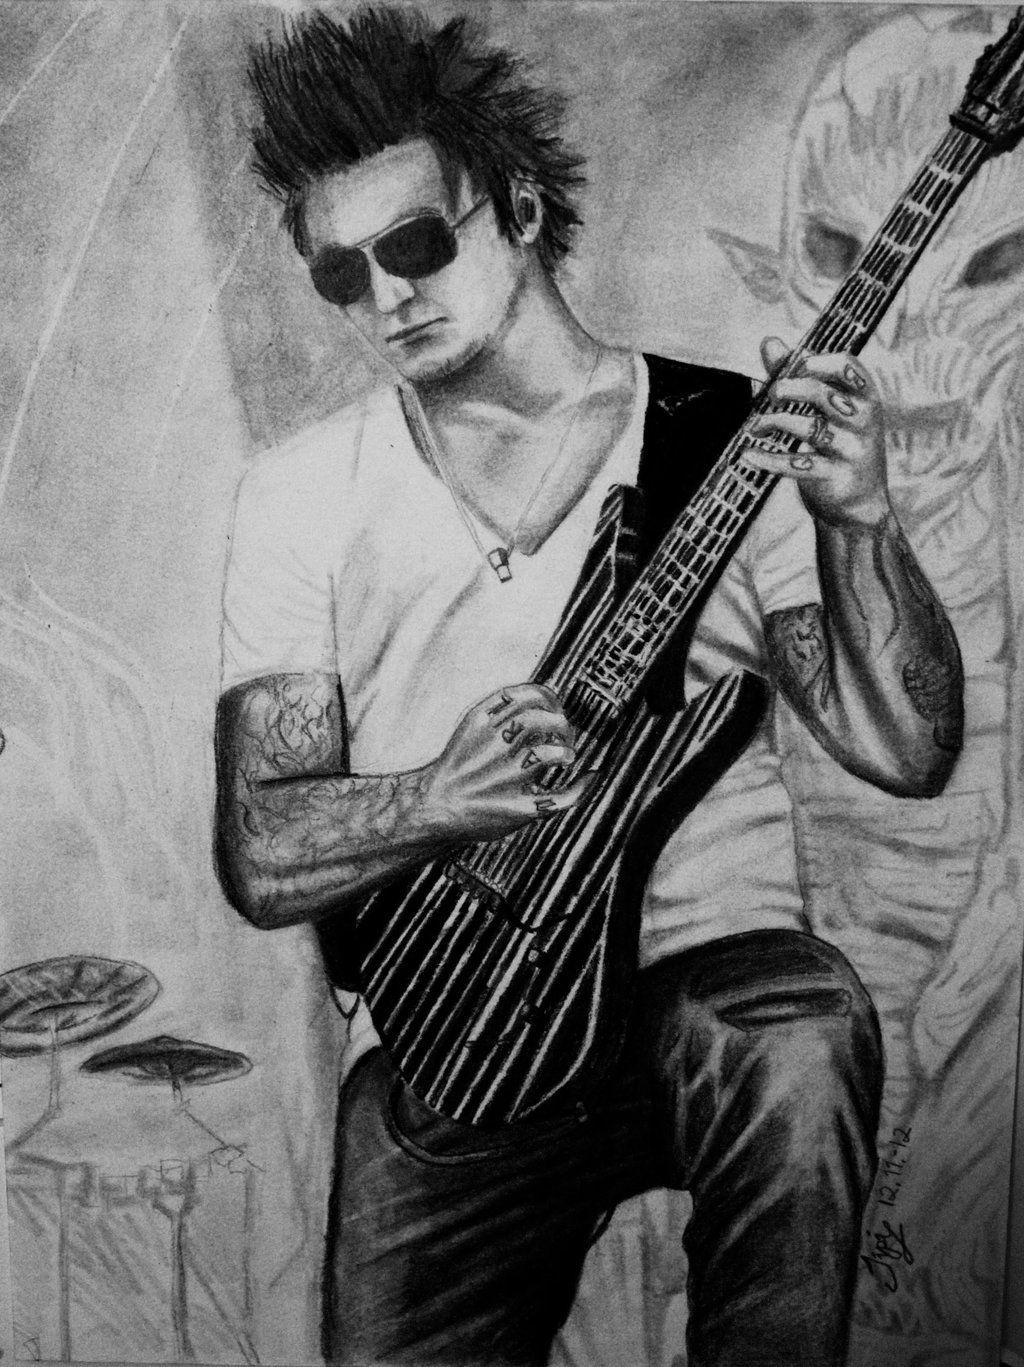 Gates from Avenged Sevenfold